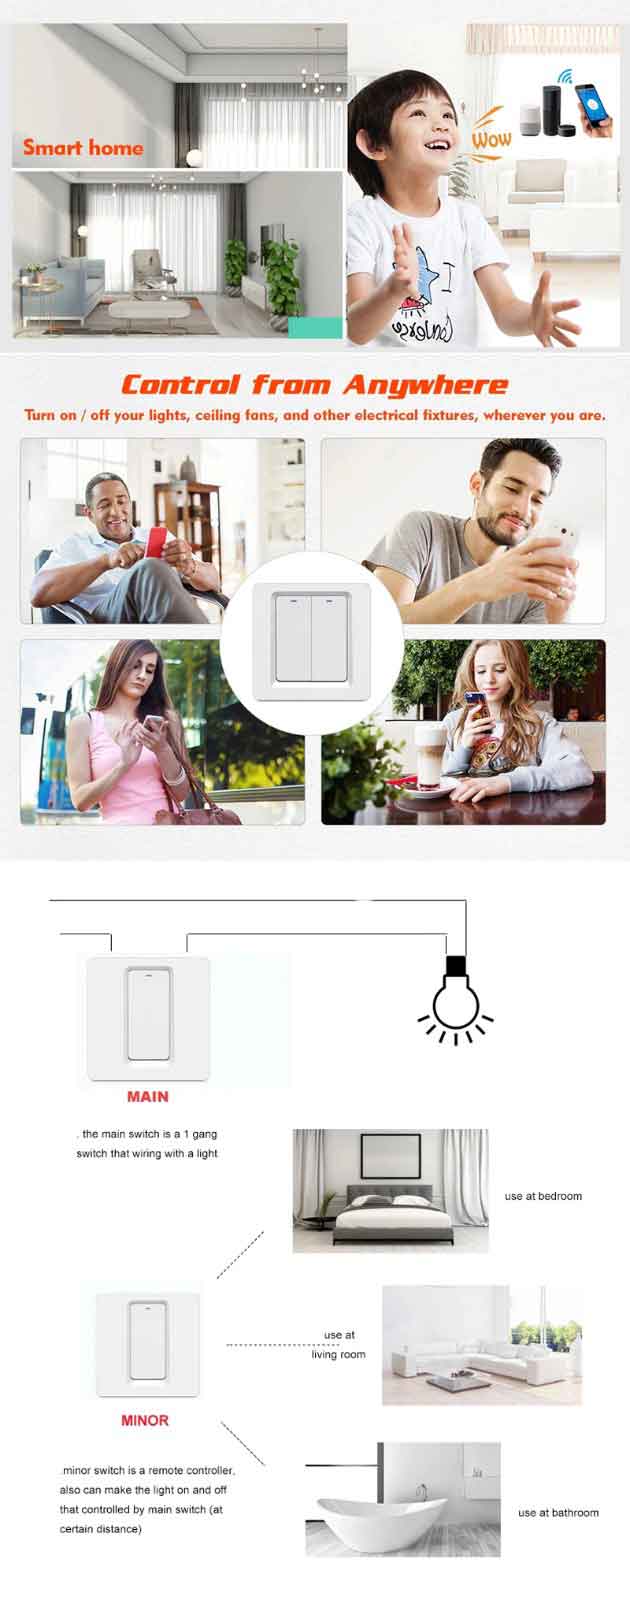 Smart Life DS-102 WiFi Light Touch Switch 2 Gang Wireless Wall Switch With Push Button